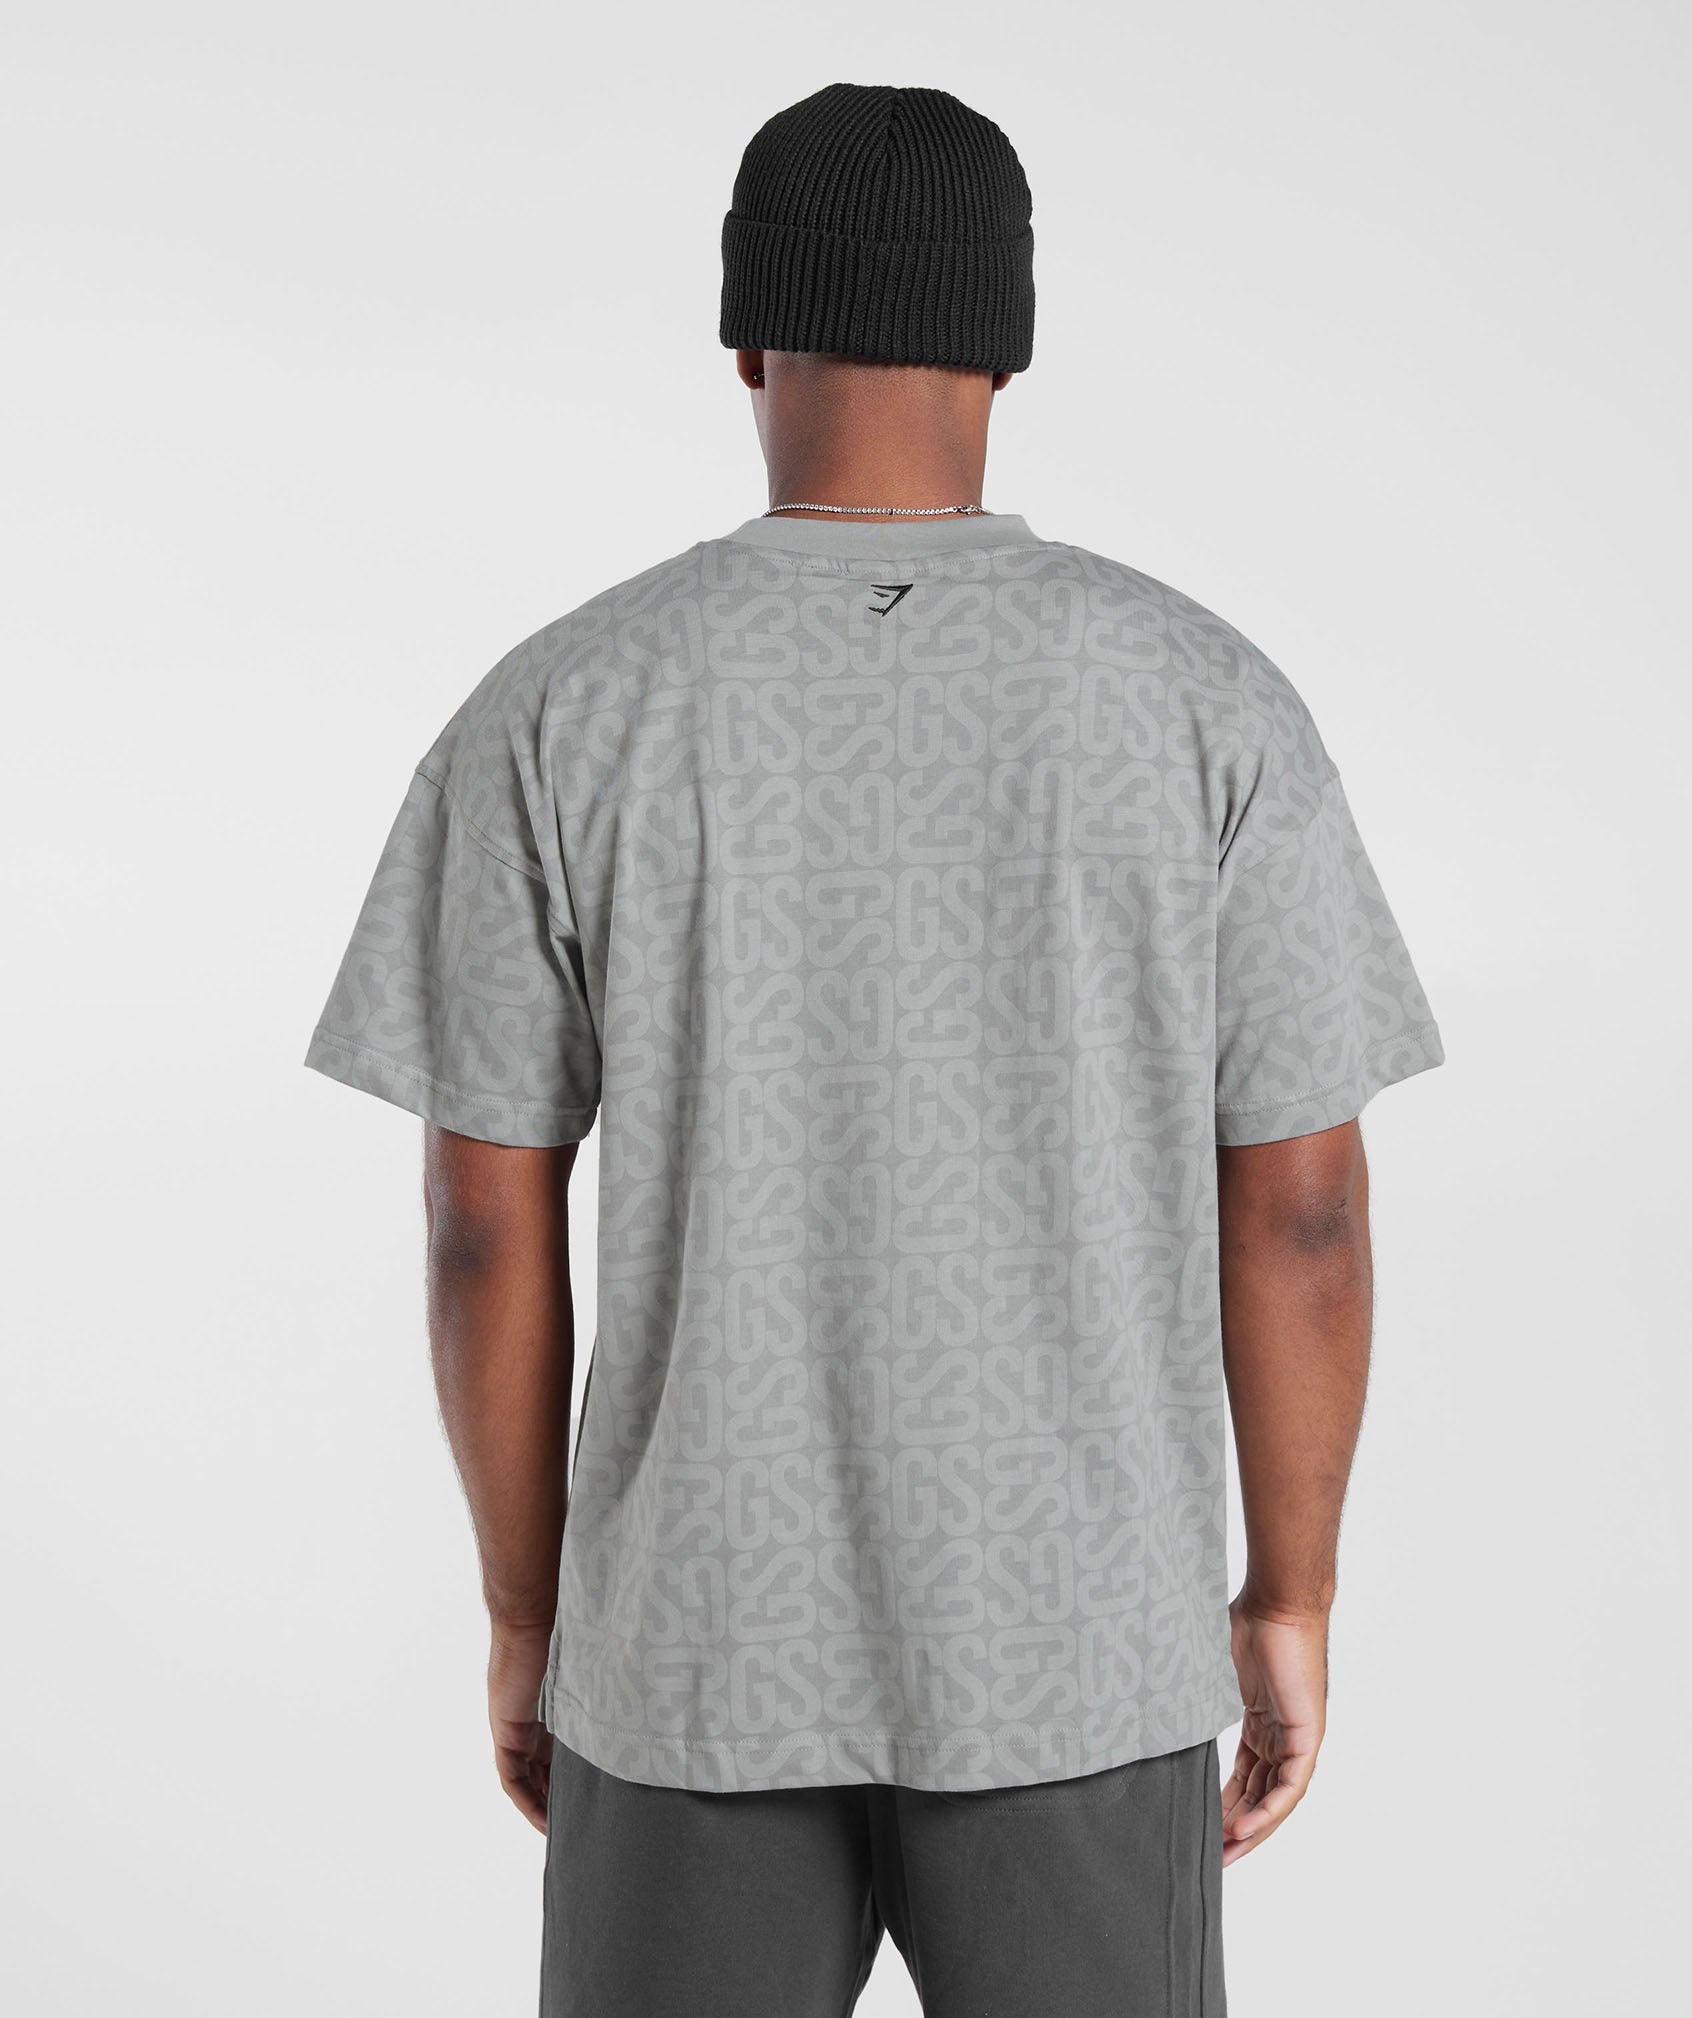 Rest Day T-Shirt in Smokey Grey - view 2